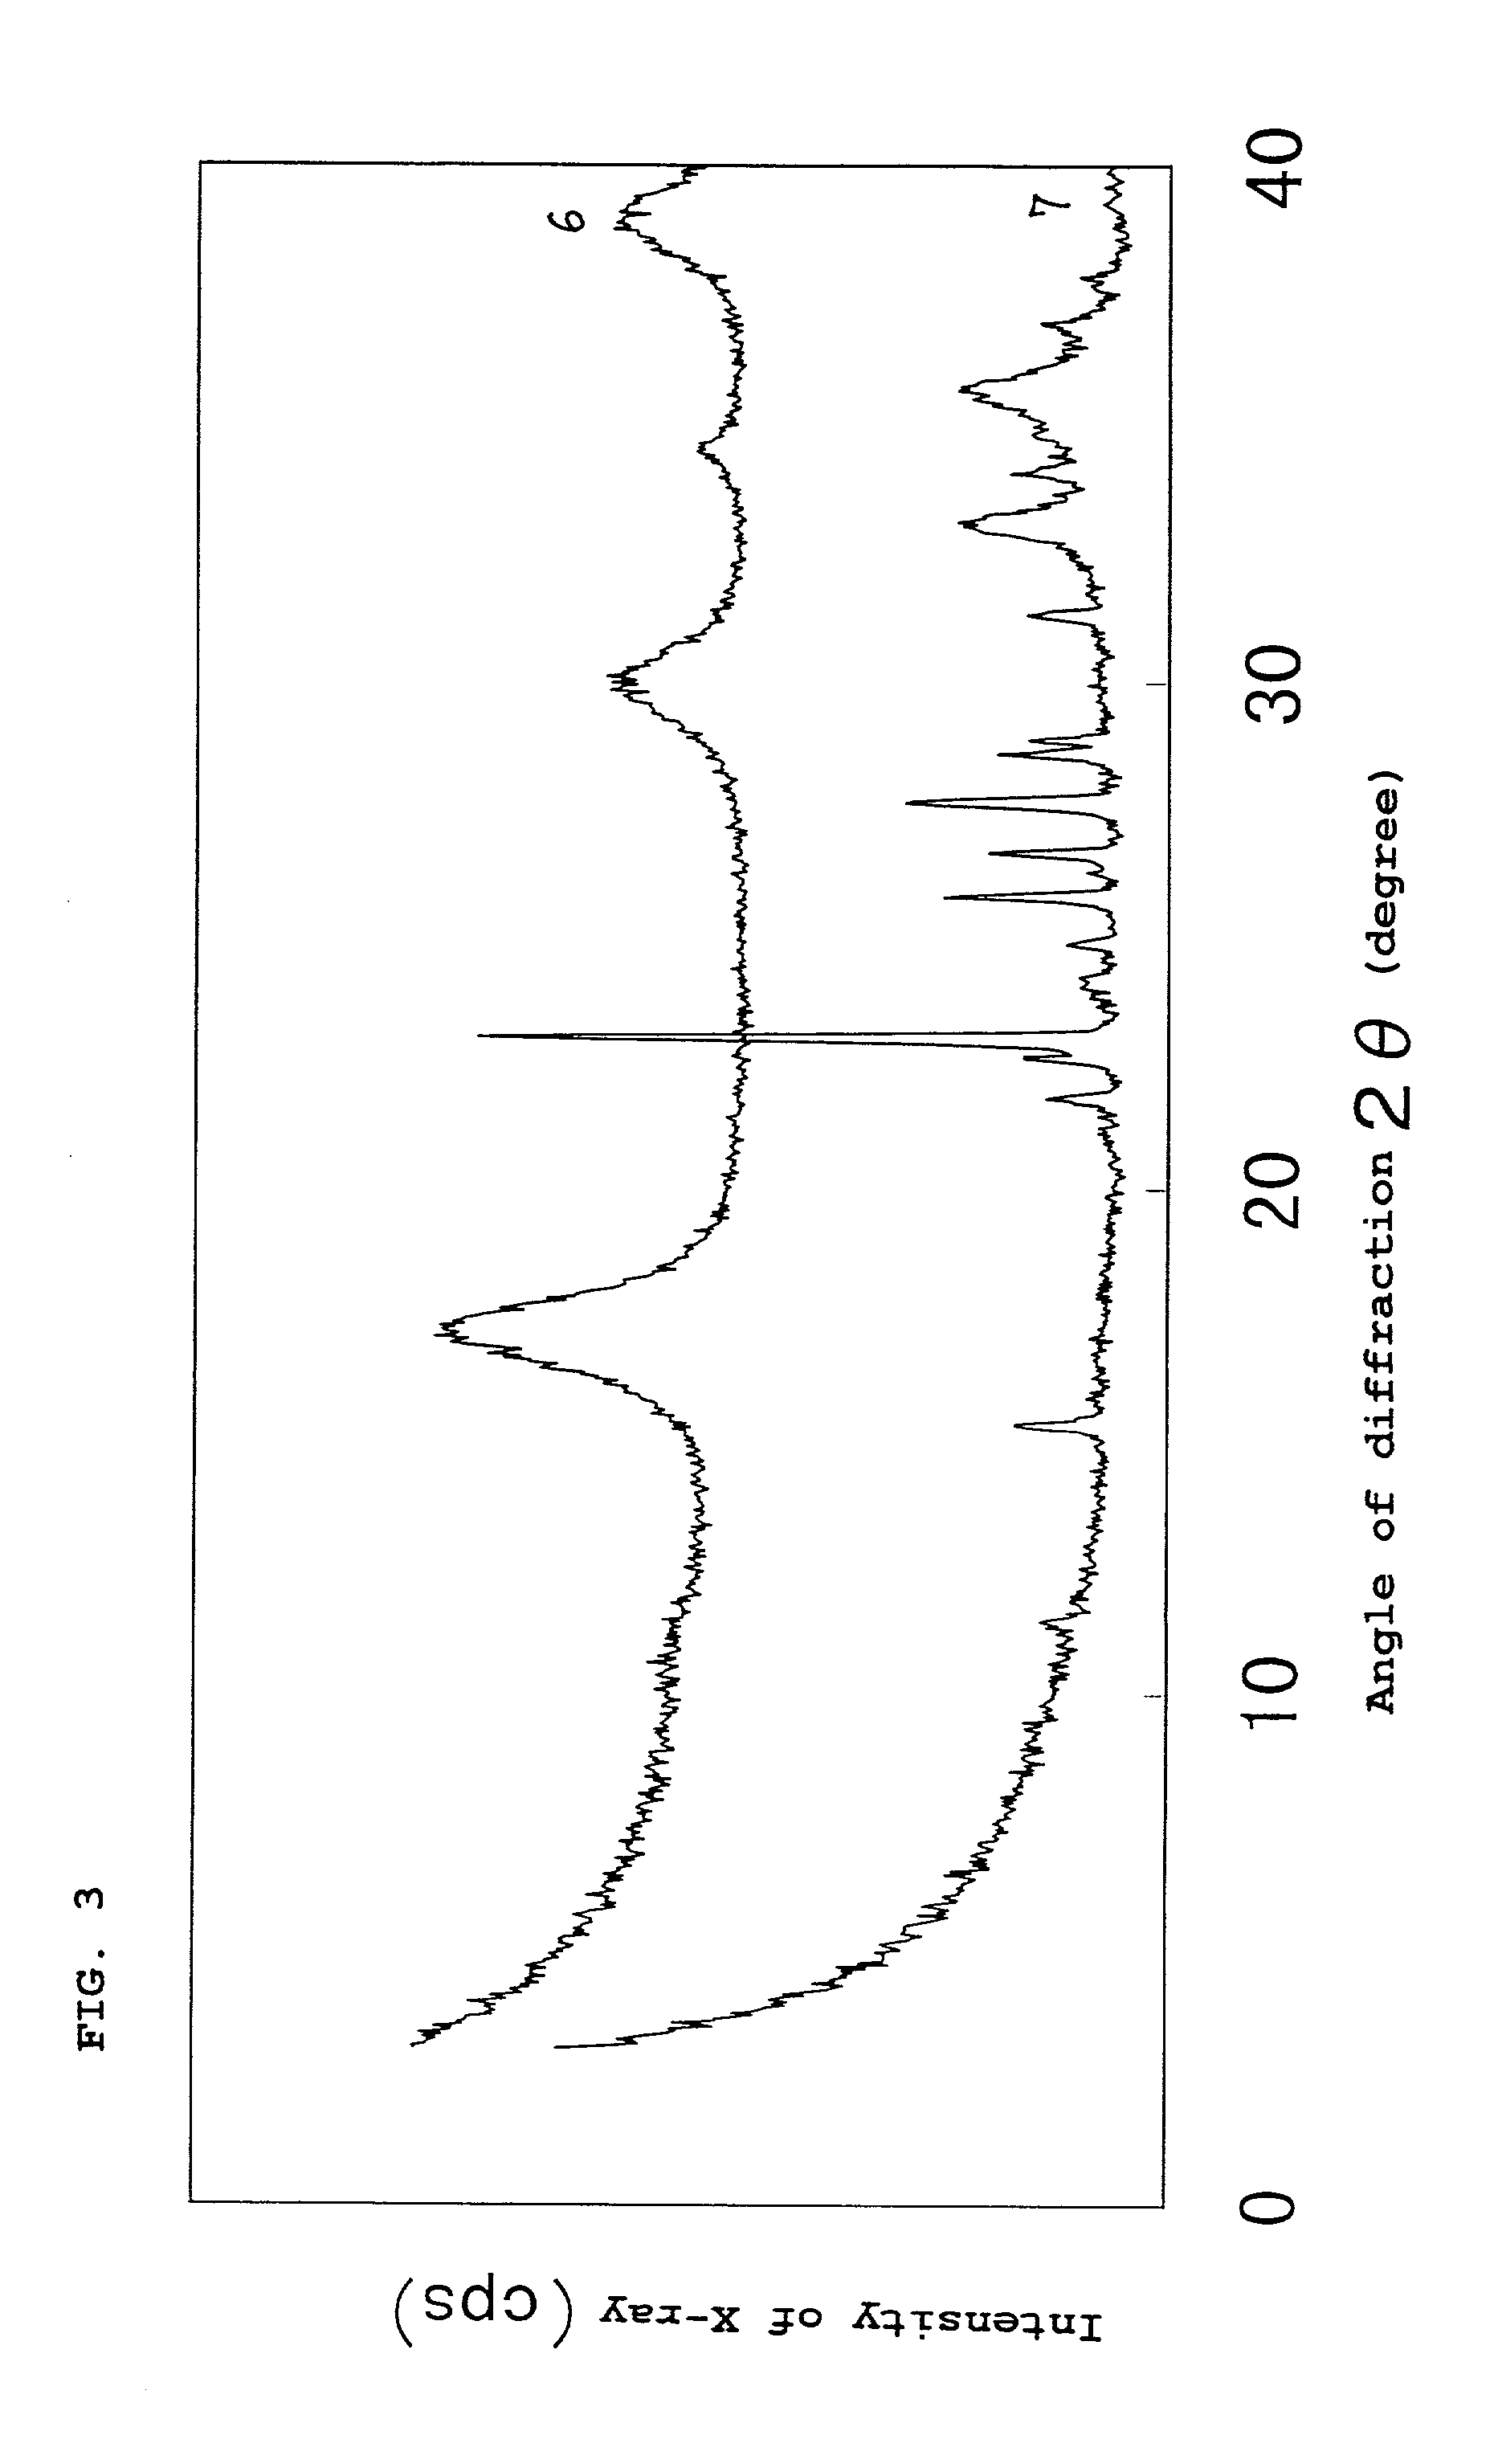 Iron sulfides, processes for producing the same, iron sulfide mixture, heavy metal treating agent, and method of treating with the agent